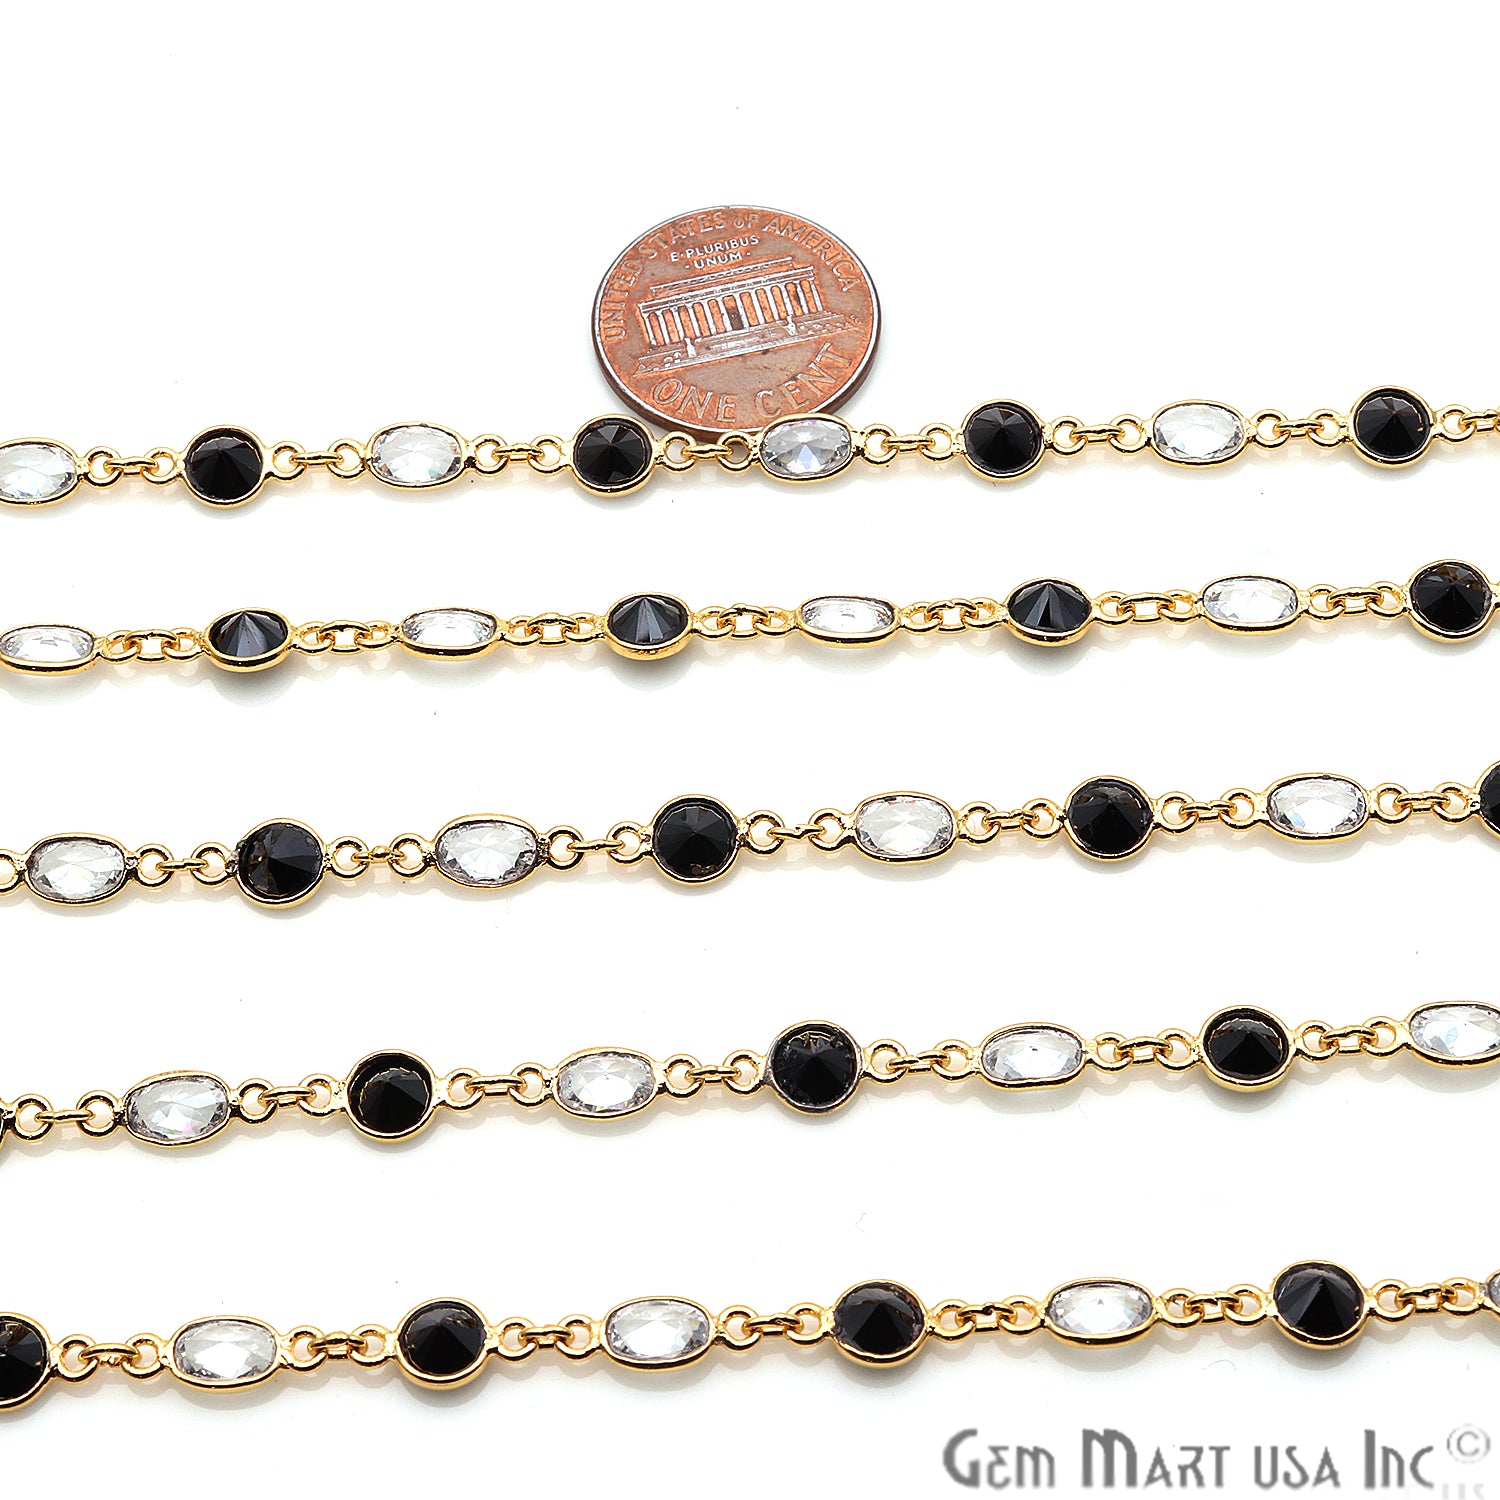 White Zirconia and Black Zirconia Gemstone Bezeled Gold Plated Continuous Connector Chain - GemMartUSA